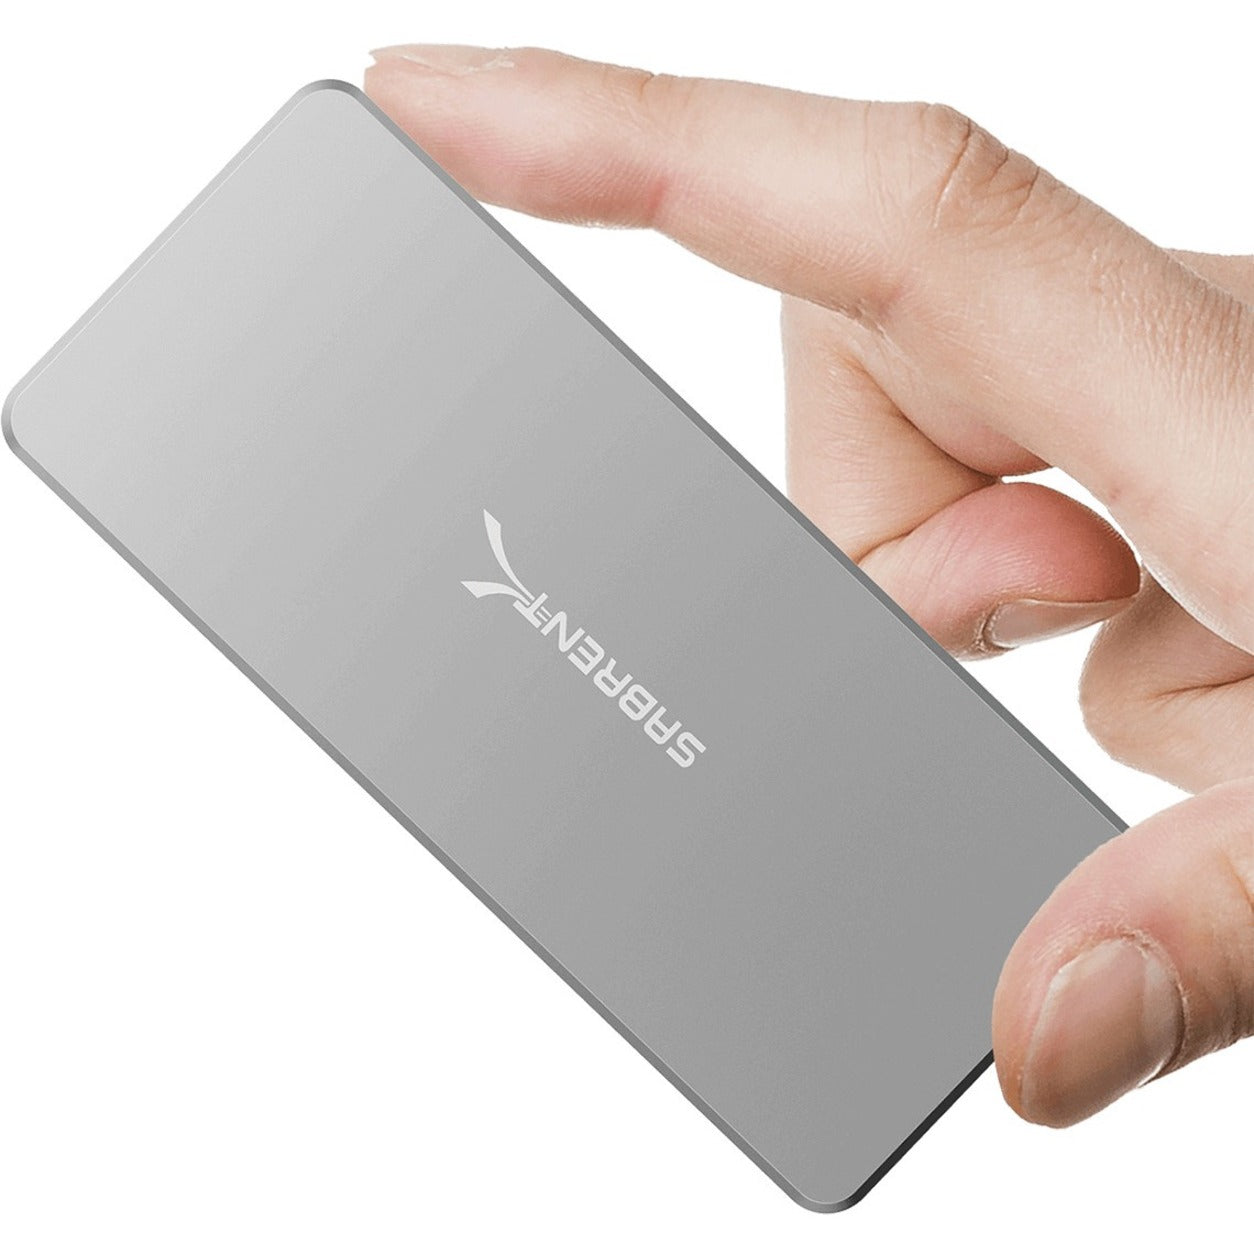 Sabrent EC-NVME USB 3.1 Aluminum Enclosure for M.2 NVMe SSD in Gray, Compatible with PC, MacBook, NAS Disk Station, Linux, Windows 8/8.1/10, Mac OS 10.1+, Samsung, WD Black, Intel, Toshiba, Kingston, USB Type-C Interface